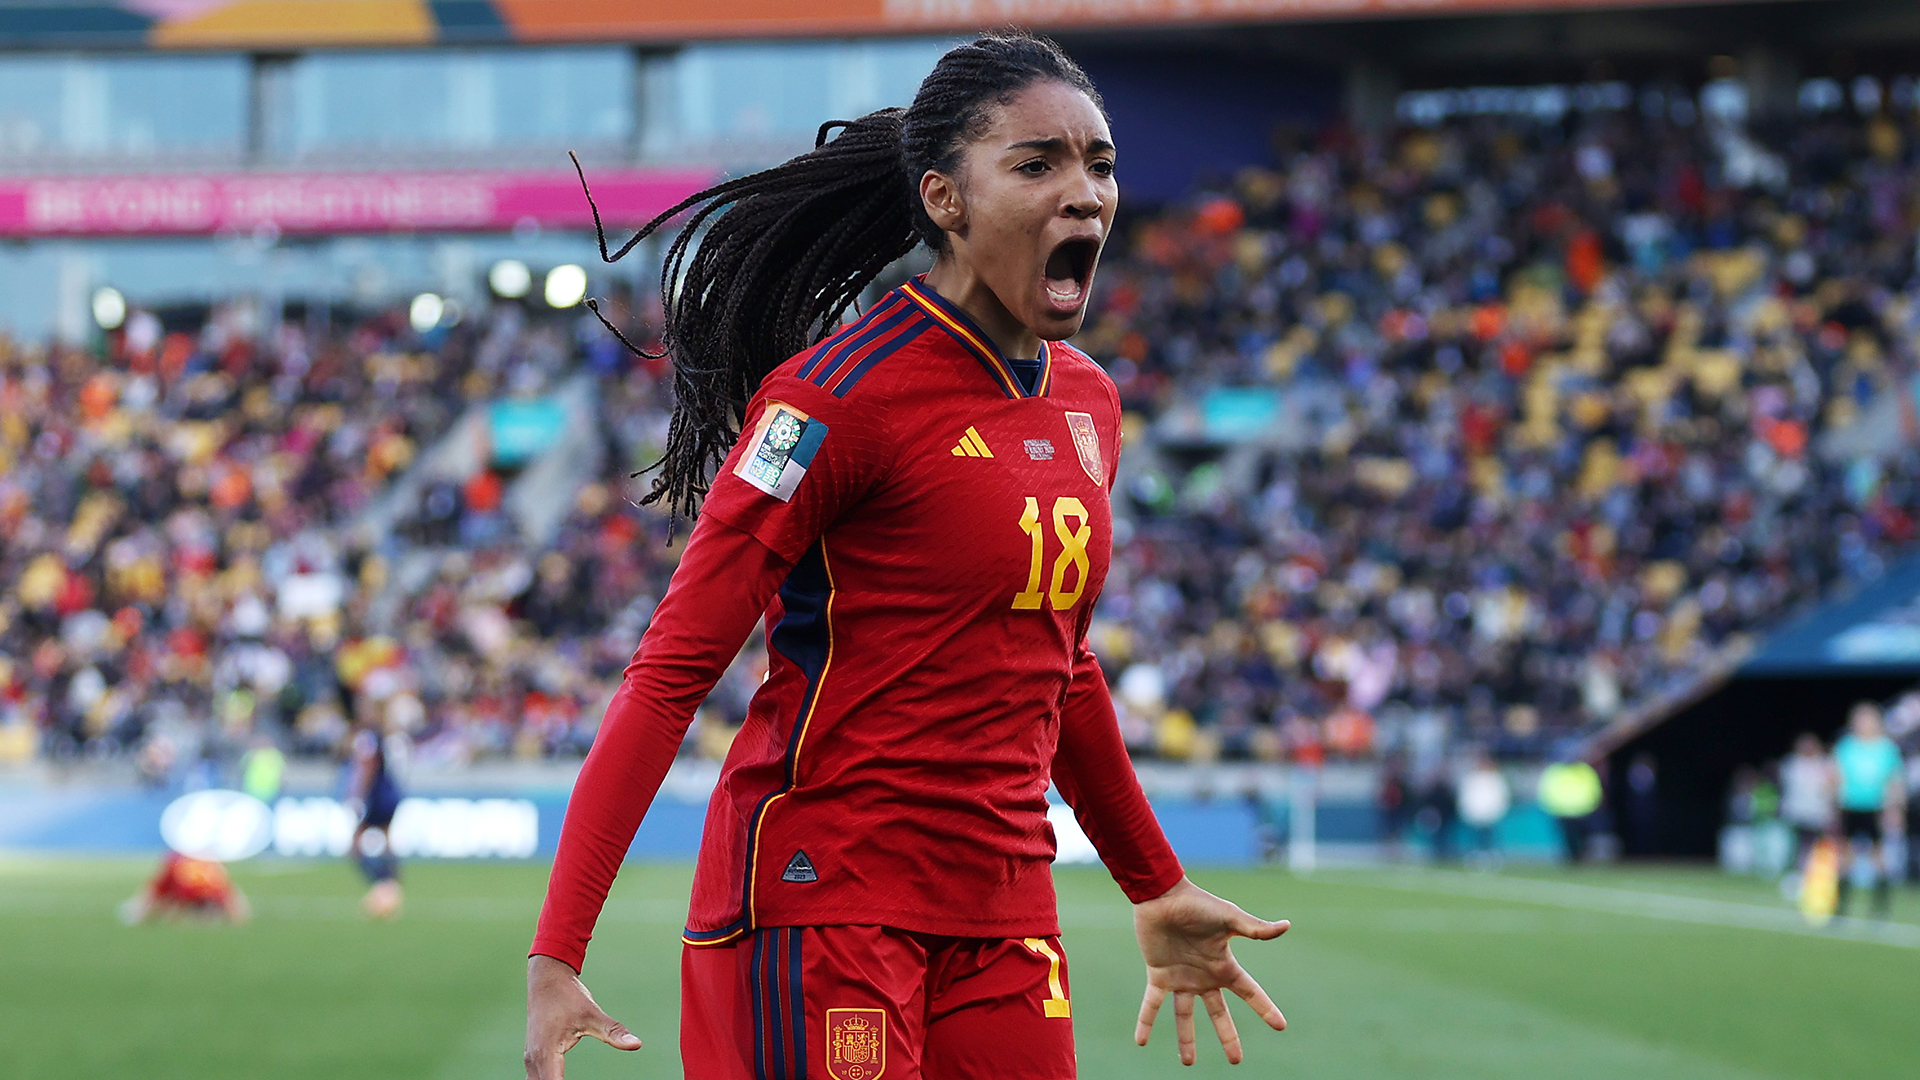 Salma Paralluelo of Spain celebrates after scoring her team's second goal during the FIFA Women's World Cup Australia &amp; New Zealand 2023 Quarter Final match between Spain and Netherlands at Wellington Regional Stadium on August 11, 2023 in Wellington, New Zealand.